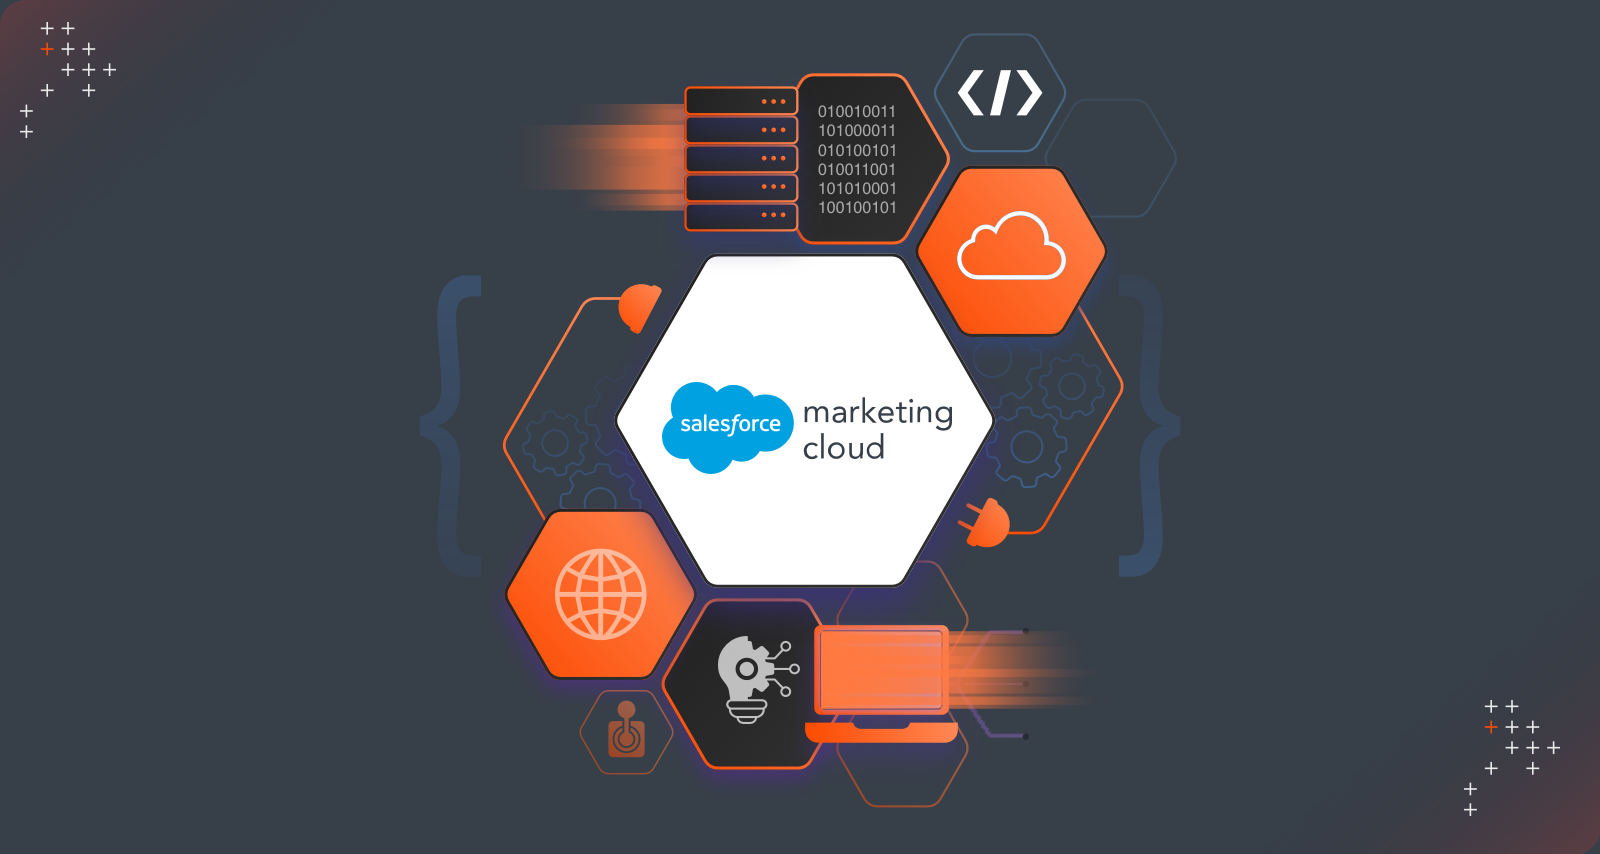 Step-By-Step Guide To Salesforce Marketing Cloud Implementation